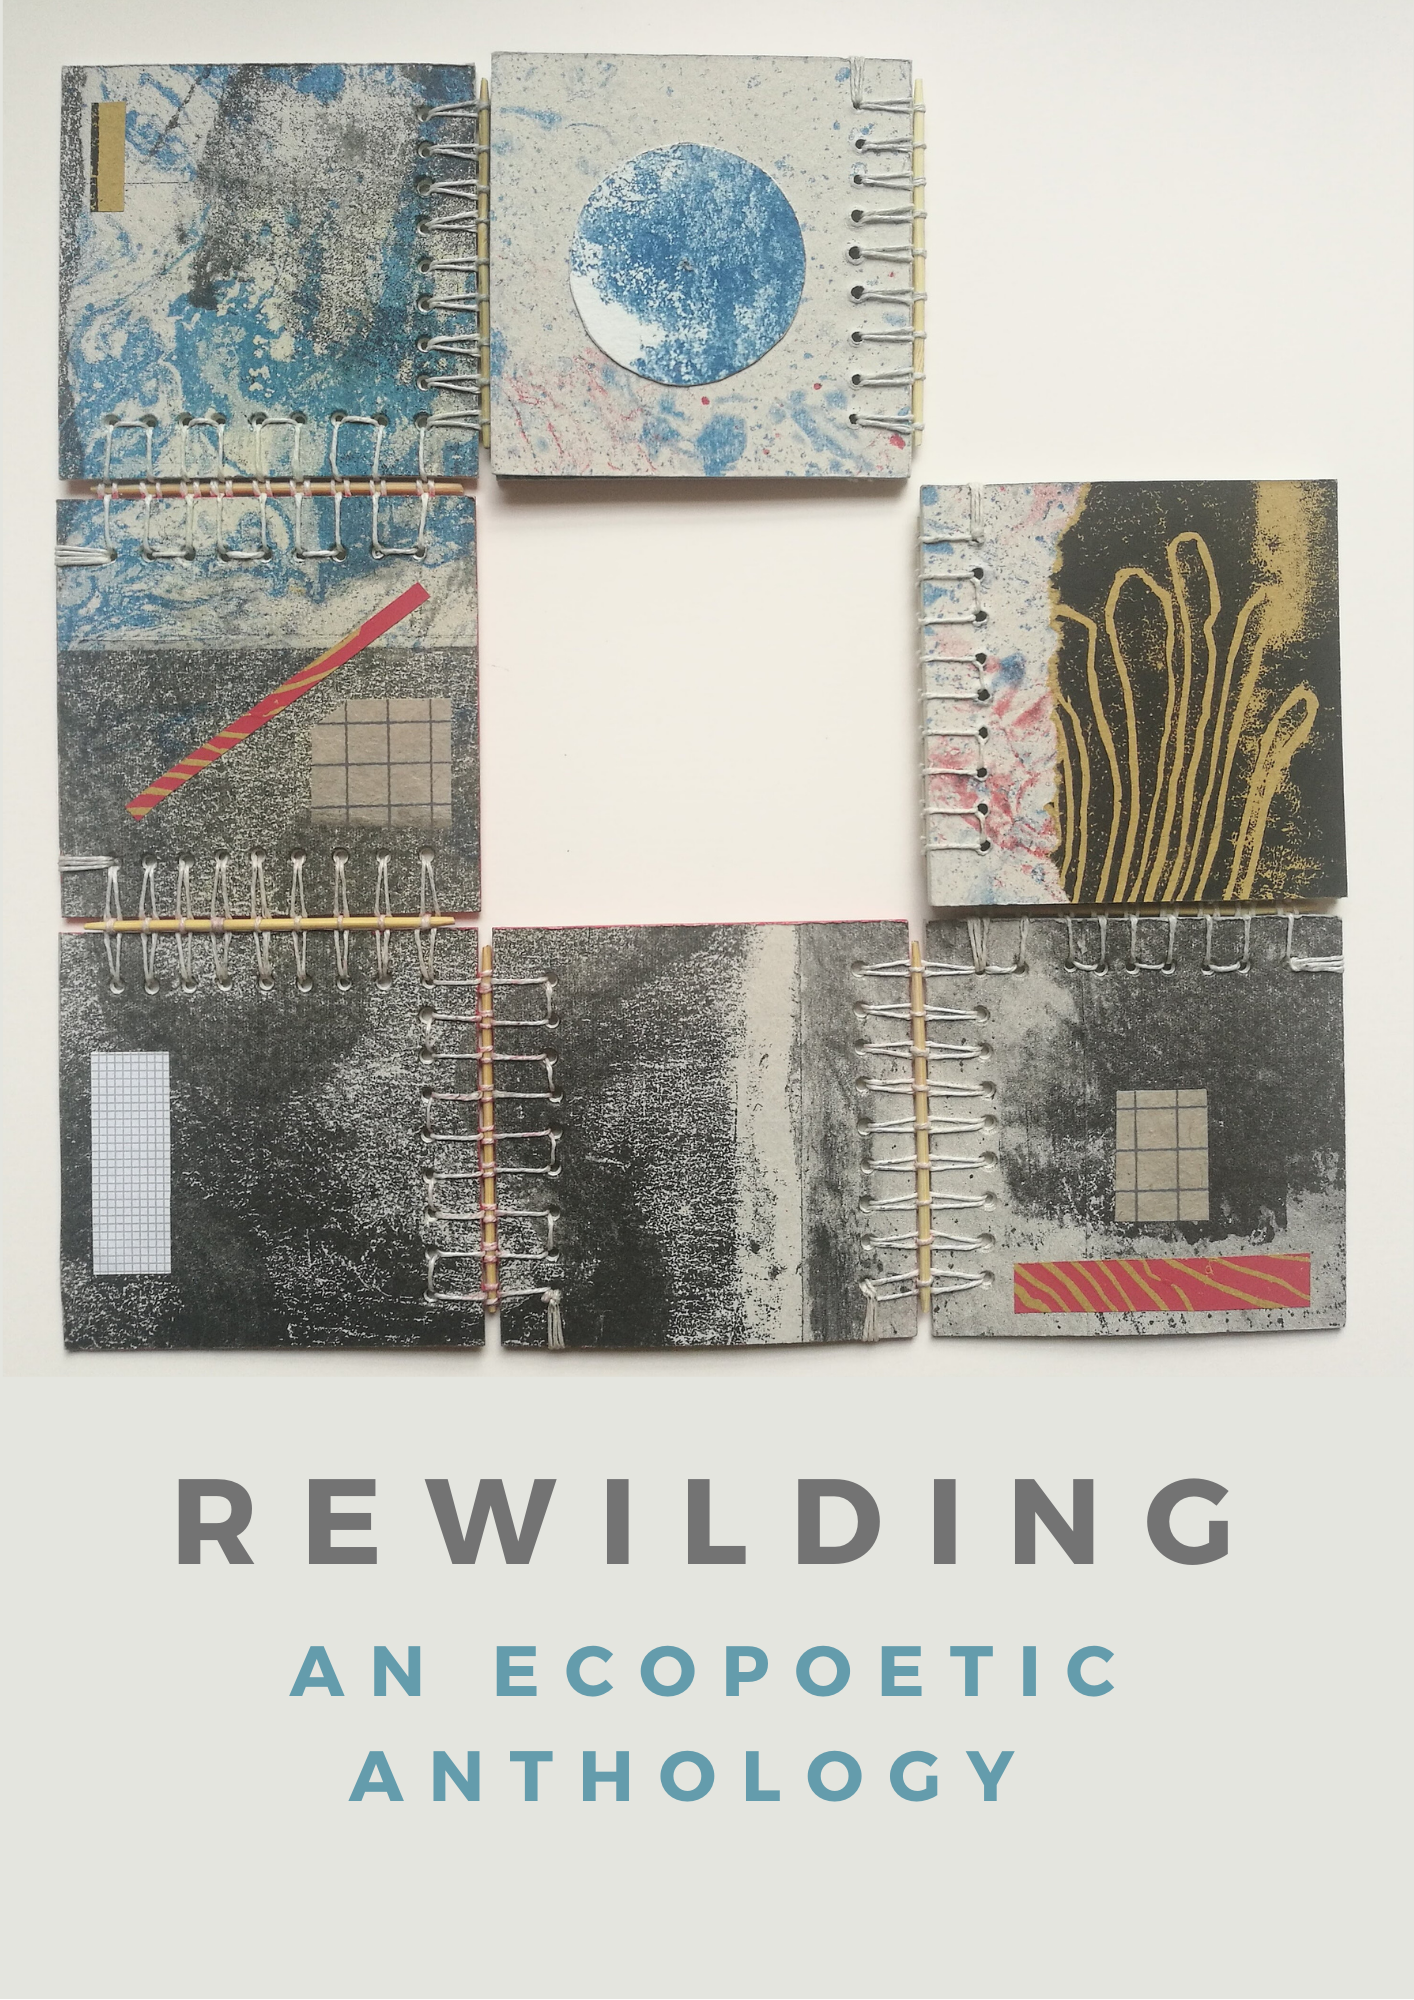 Cover of the Crested Tit Collective's "Rewilding Anthology"